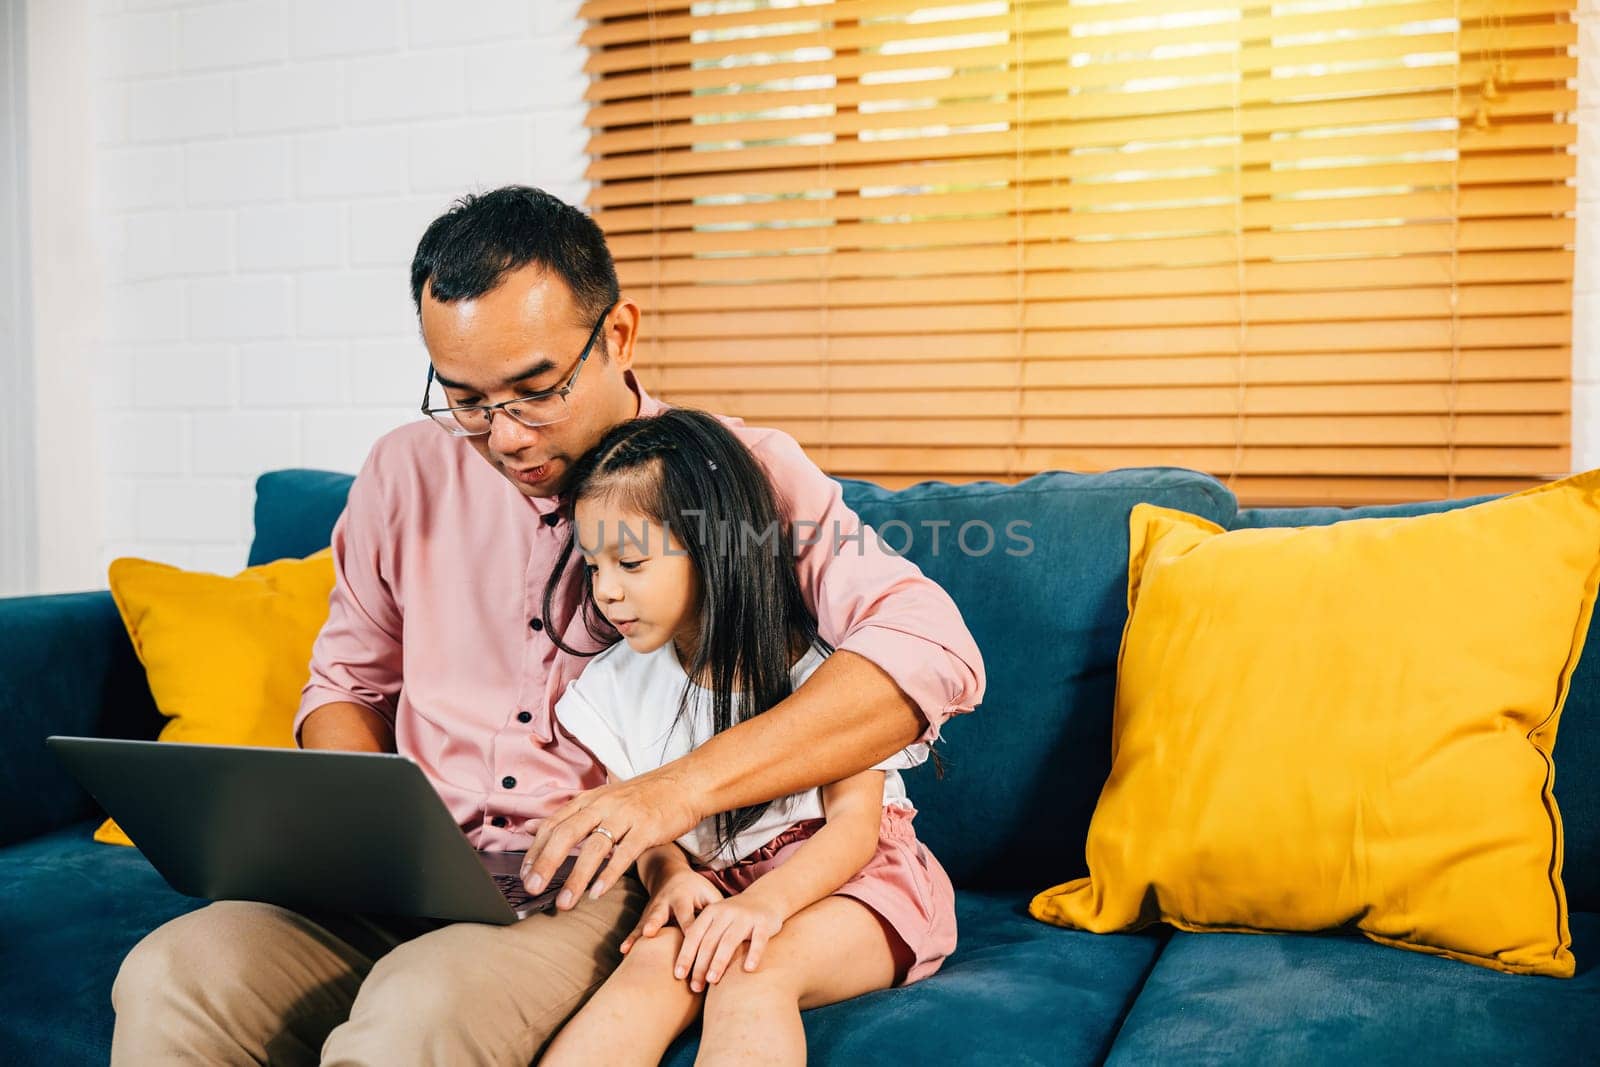 A smiling Asian father works from home on his laptop as his daughter learns on a computer for e-learning by Sorapop